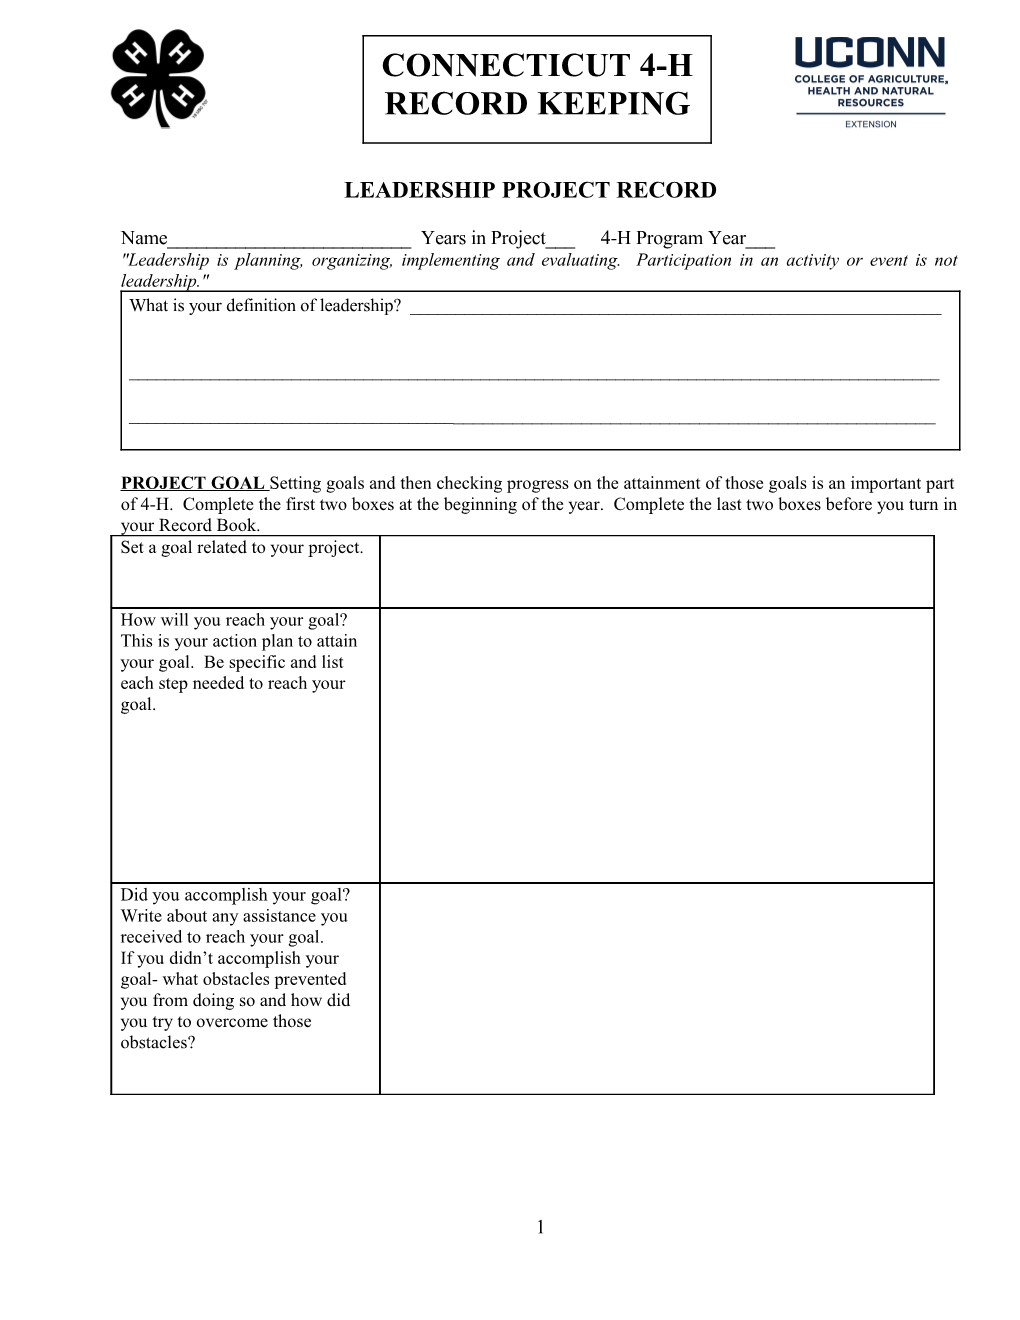 Leadership Is Planning, Organizing, Implementing and Evaluating. Participation in an Activity